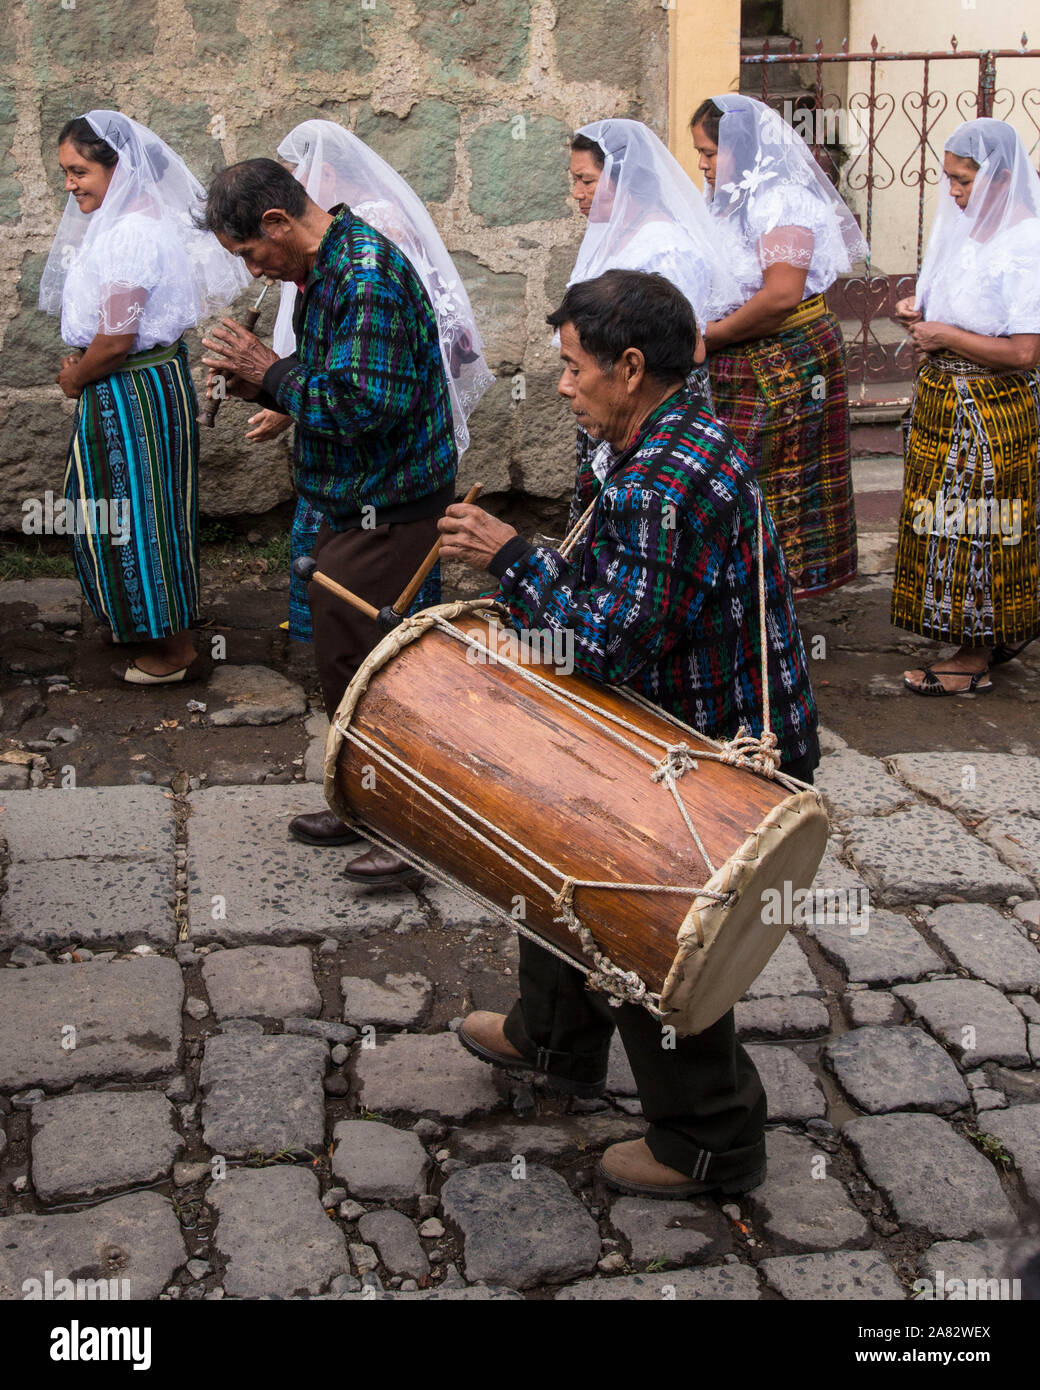 A traditional drummer and flute player in the Catholic procession of the Virgin of Carmen in San Pedro la Laguna, Guatemala.  Women in traditional May Stock Photo